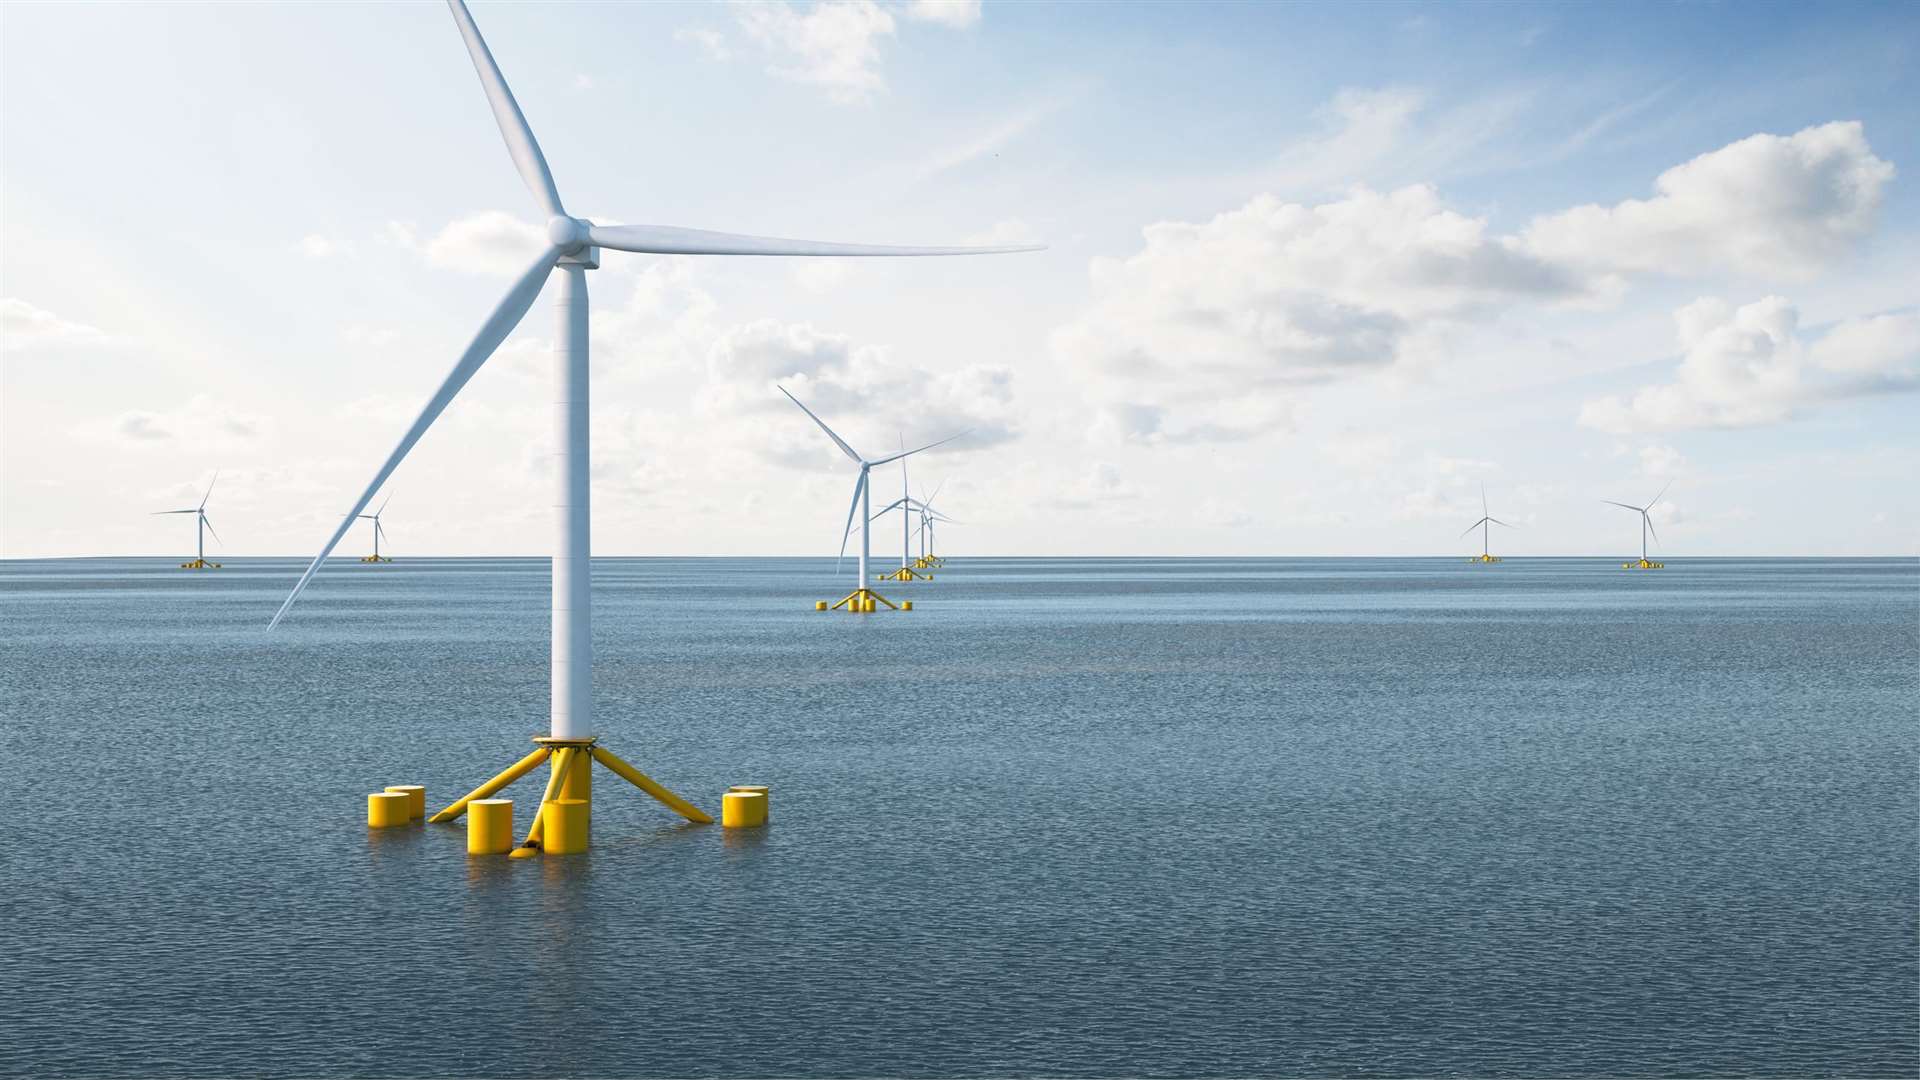 Pentland Floating Offshore Wind Farm will have six turbines rather than seven, while while maintaining its 100MW capacity.